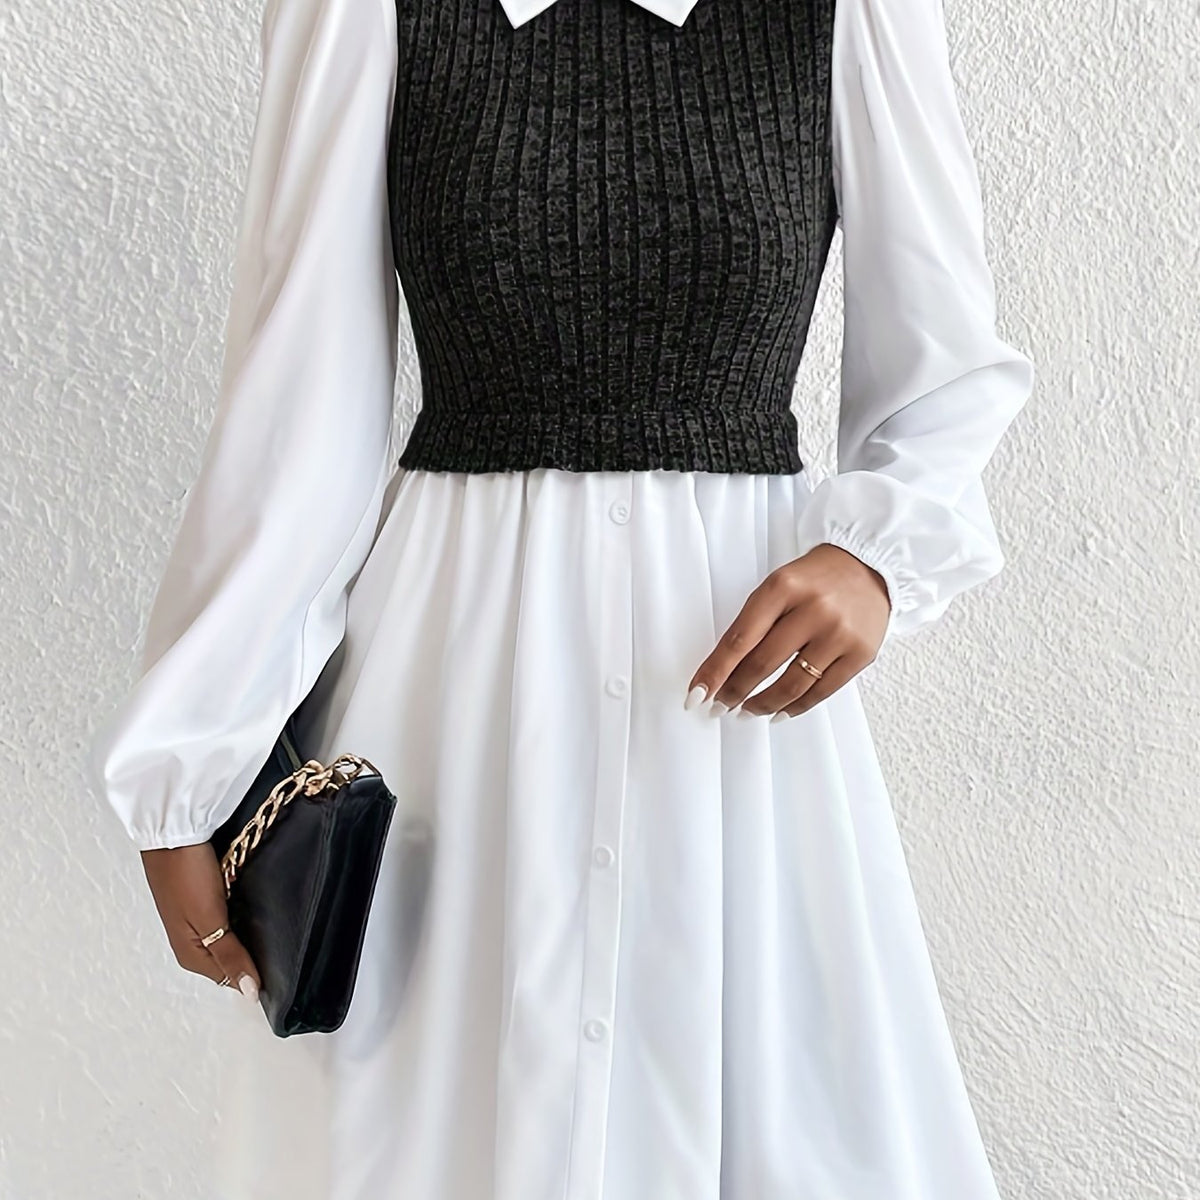 Button Front Stitching Knit Dress, Elegant Long Sleeve Collared Dress, Women's Clothing